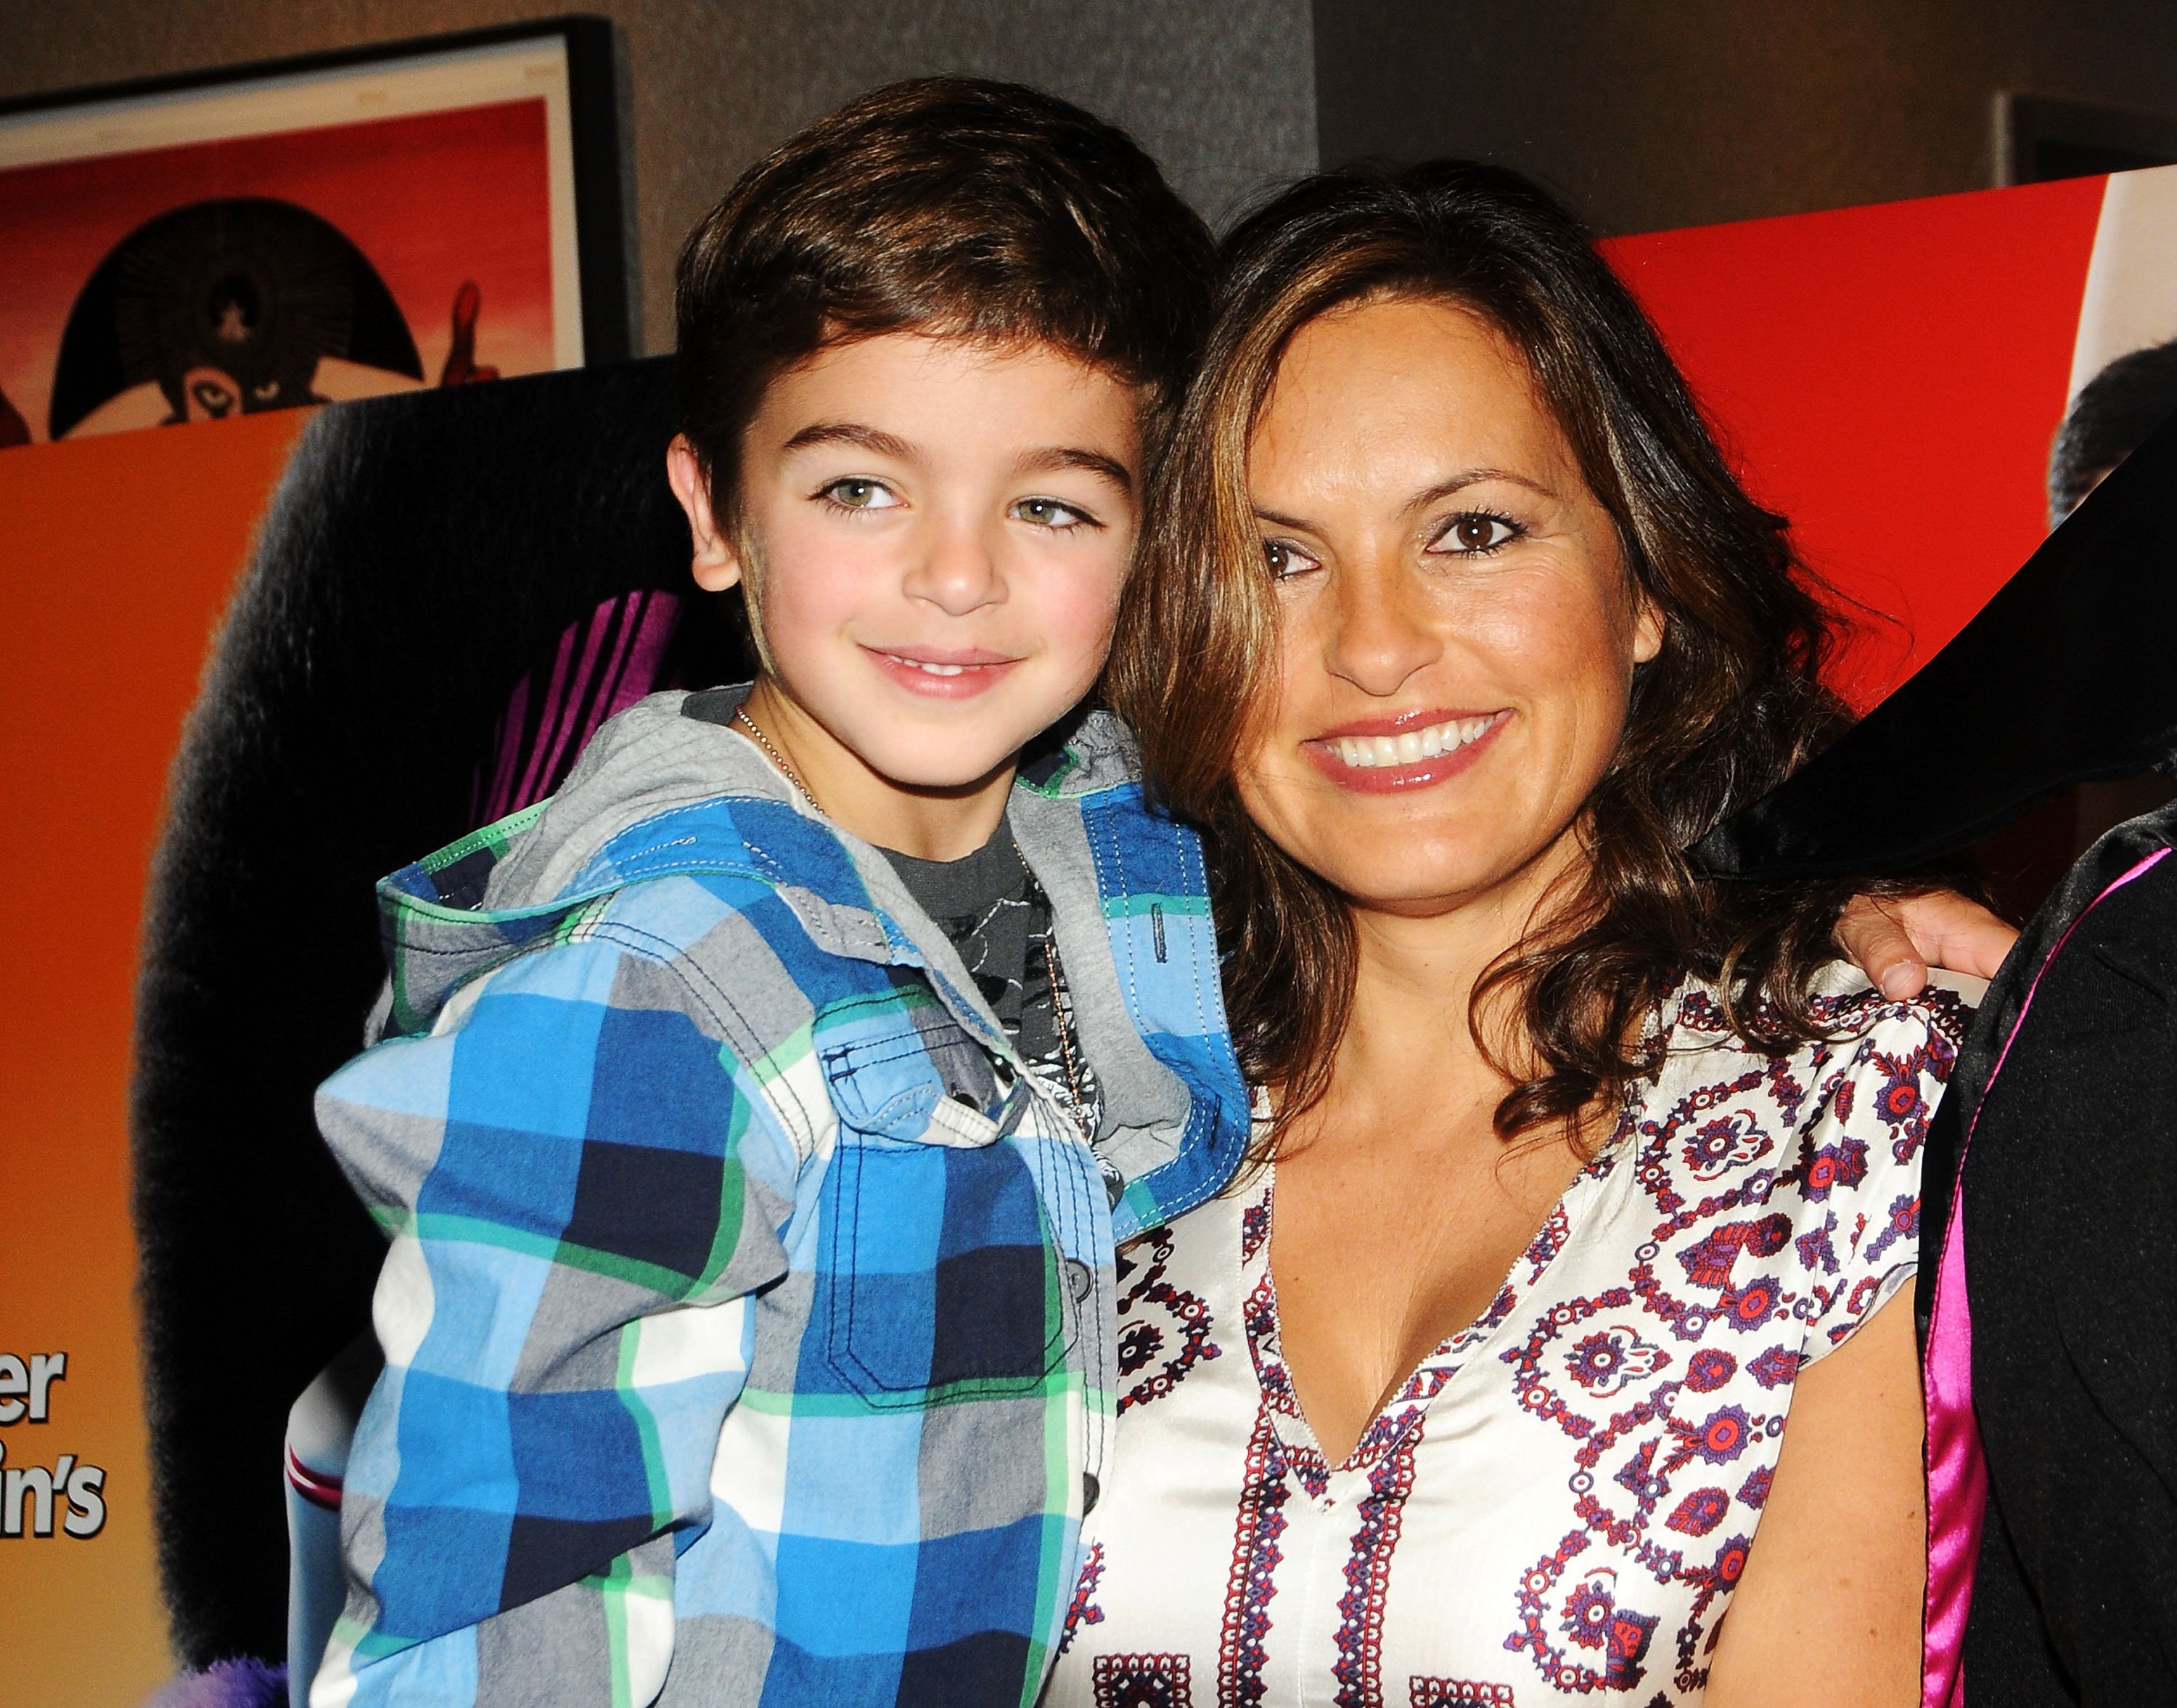  Mariska Hargitay and August at the "Hotel Transylvania" New York Premiere at the Academy Theater at Lighthouse International on September 22, 2012. | Source: Getty Images